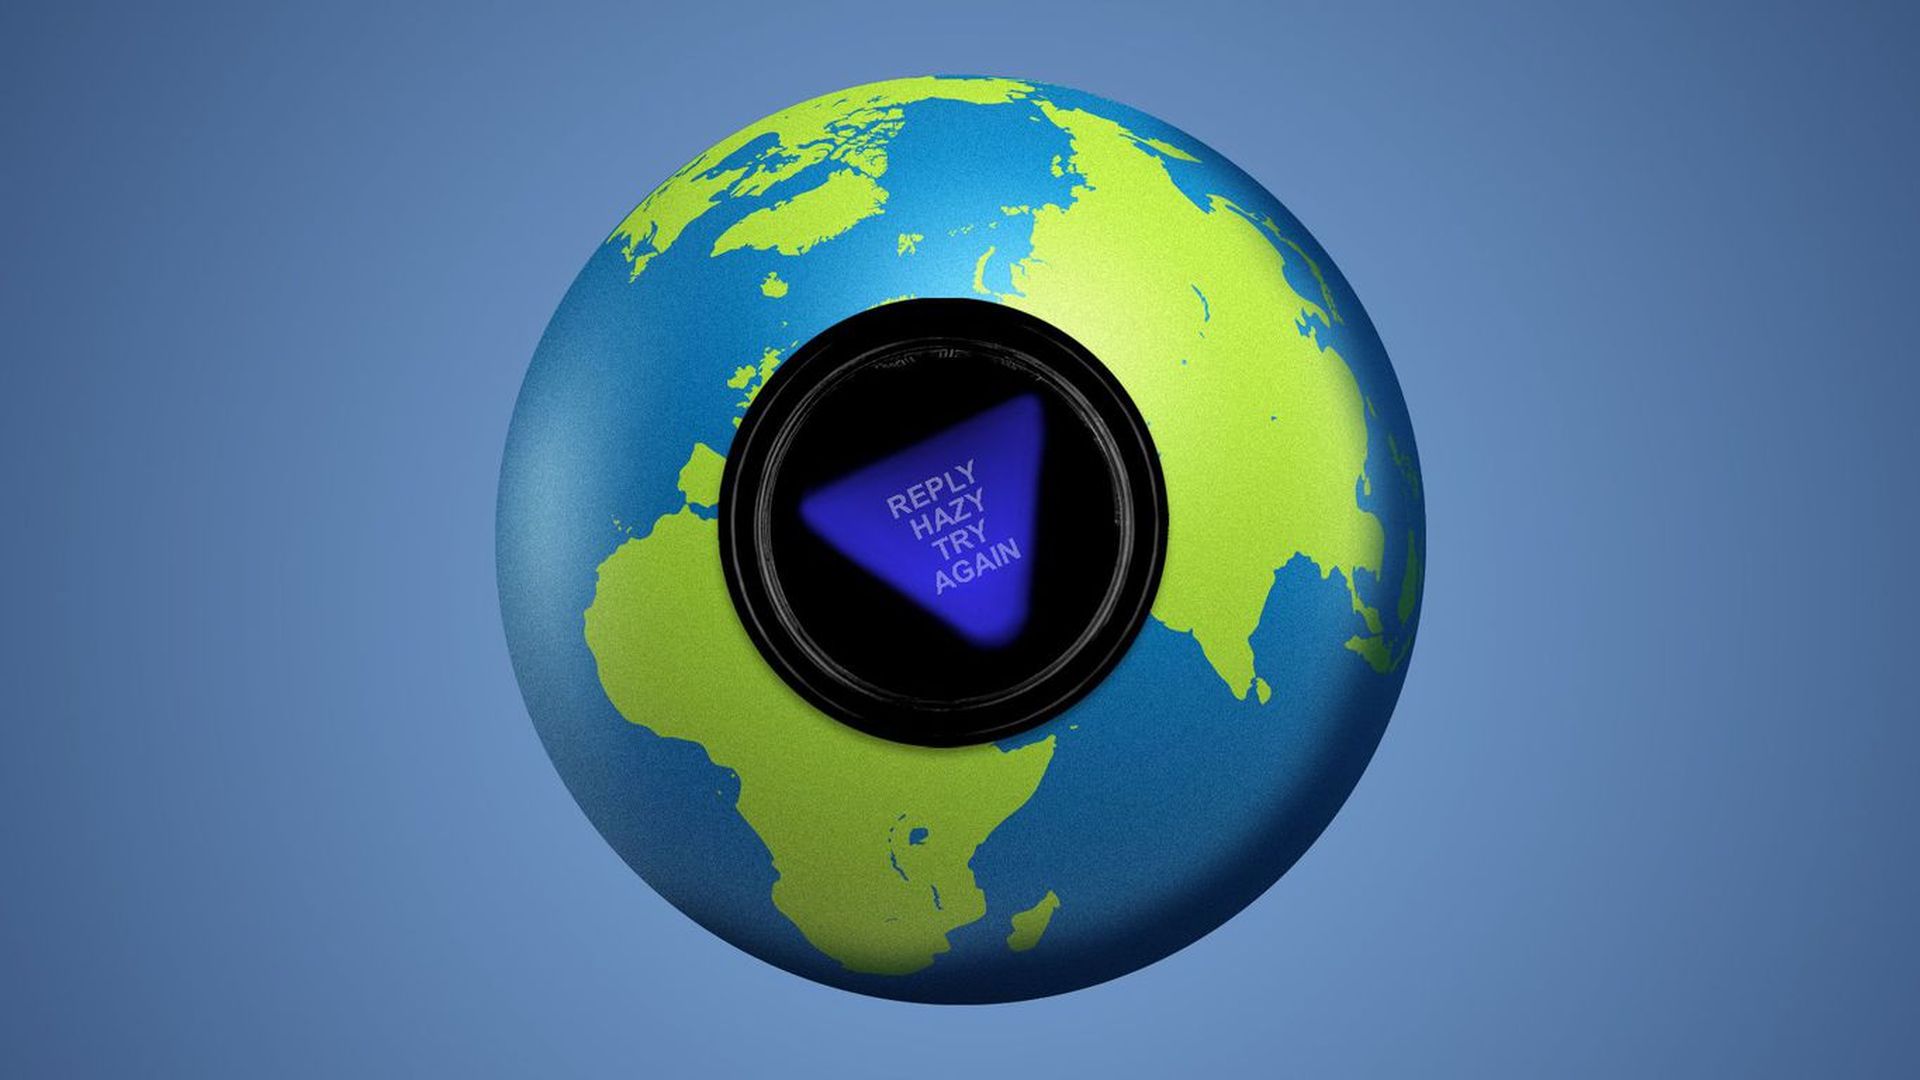 A magic 8 ball with but designed as the earth 